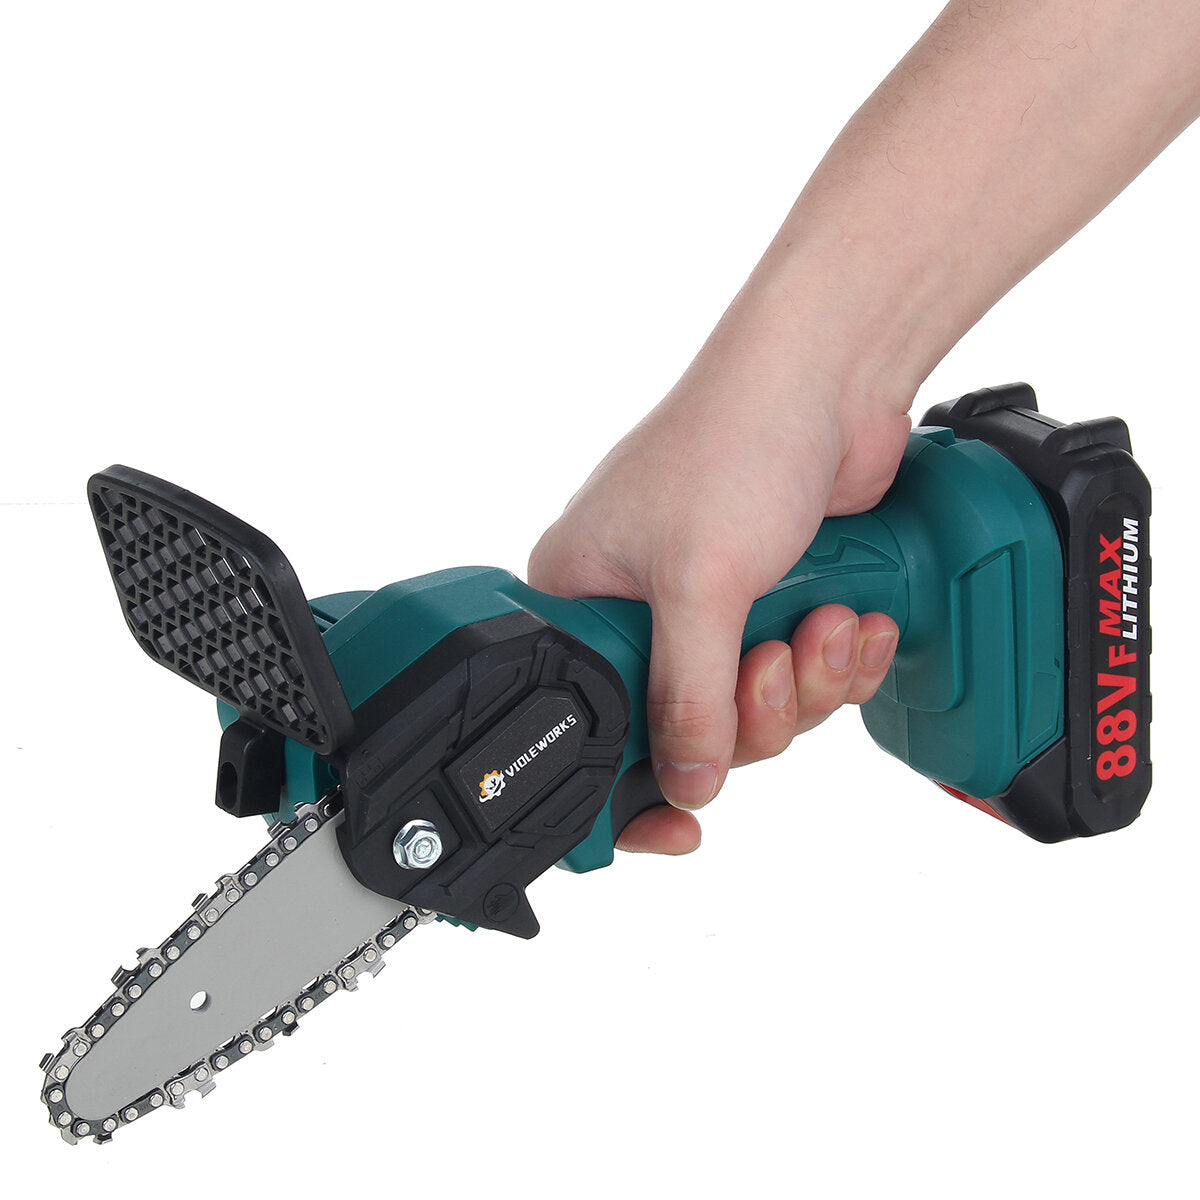 88V Cordless Electric Saw 4inch One-hand Chain Saws Woodworking Cutting Tool US Plug